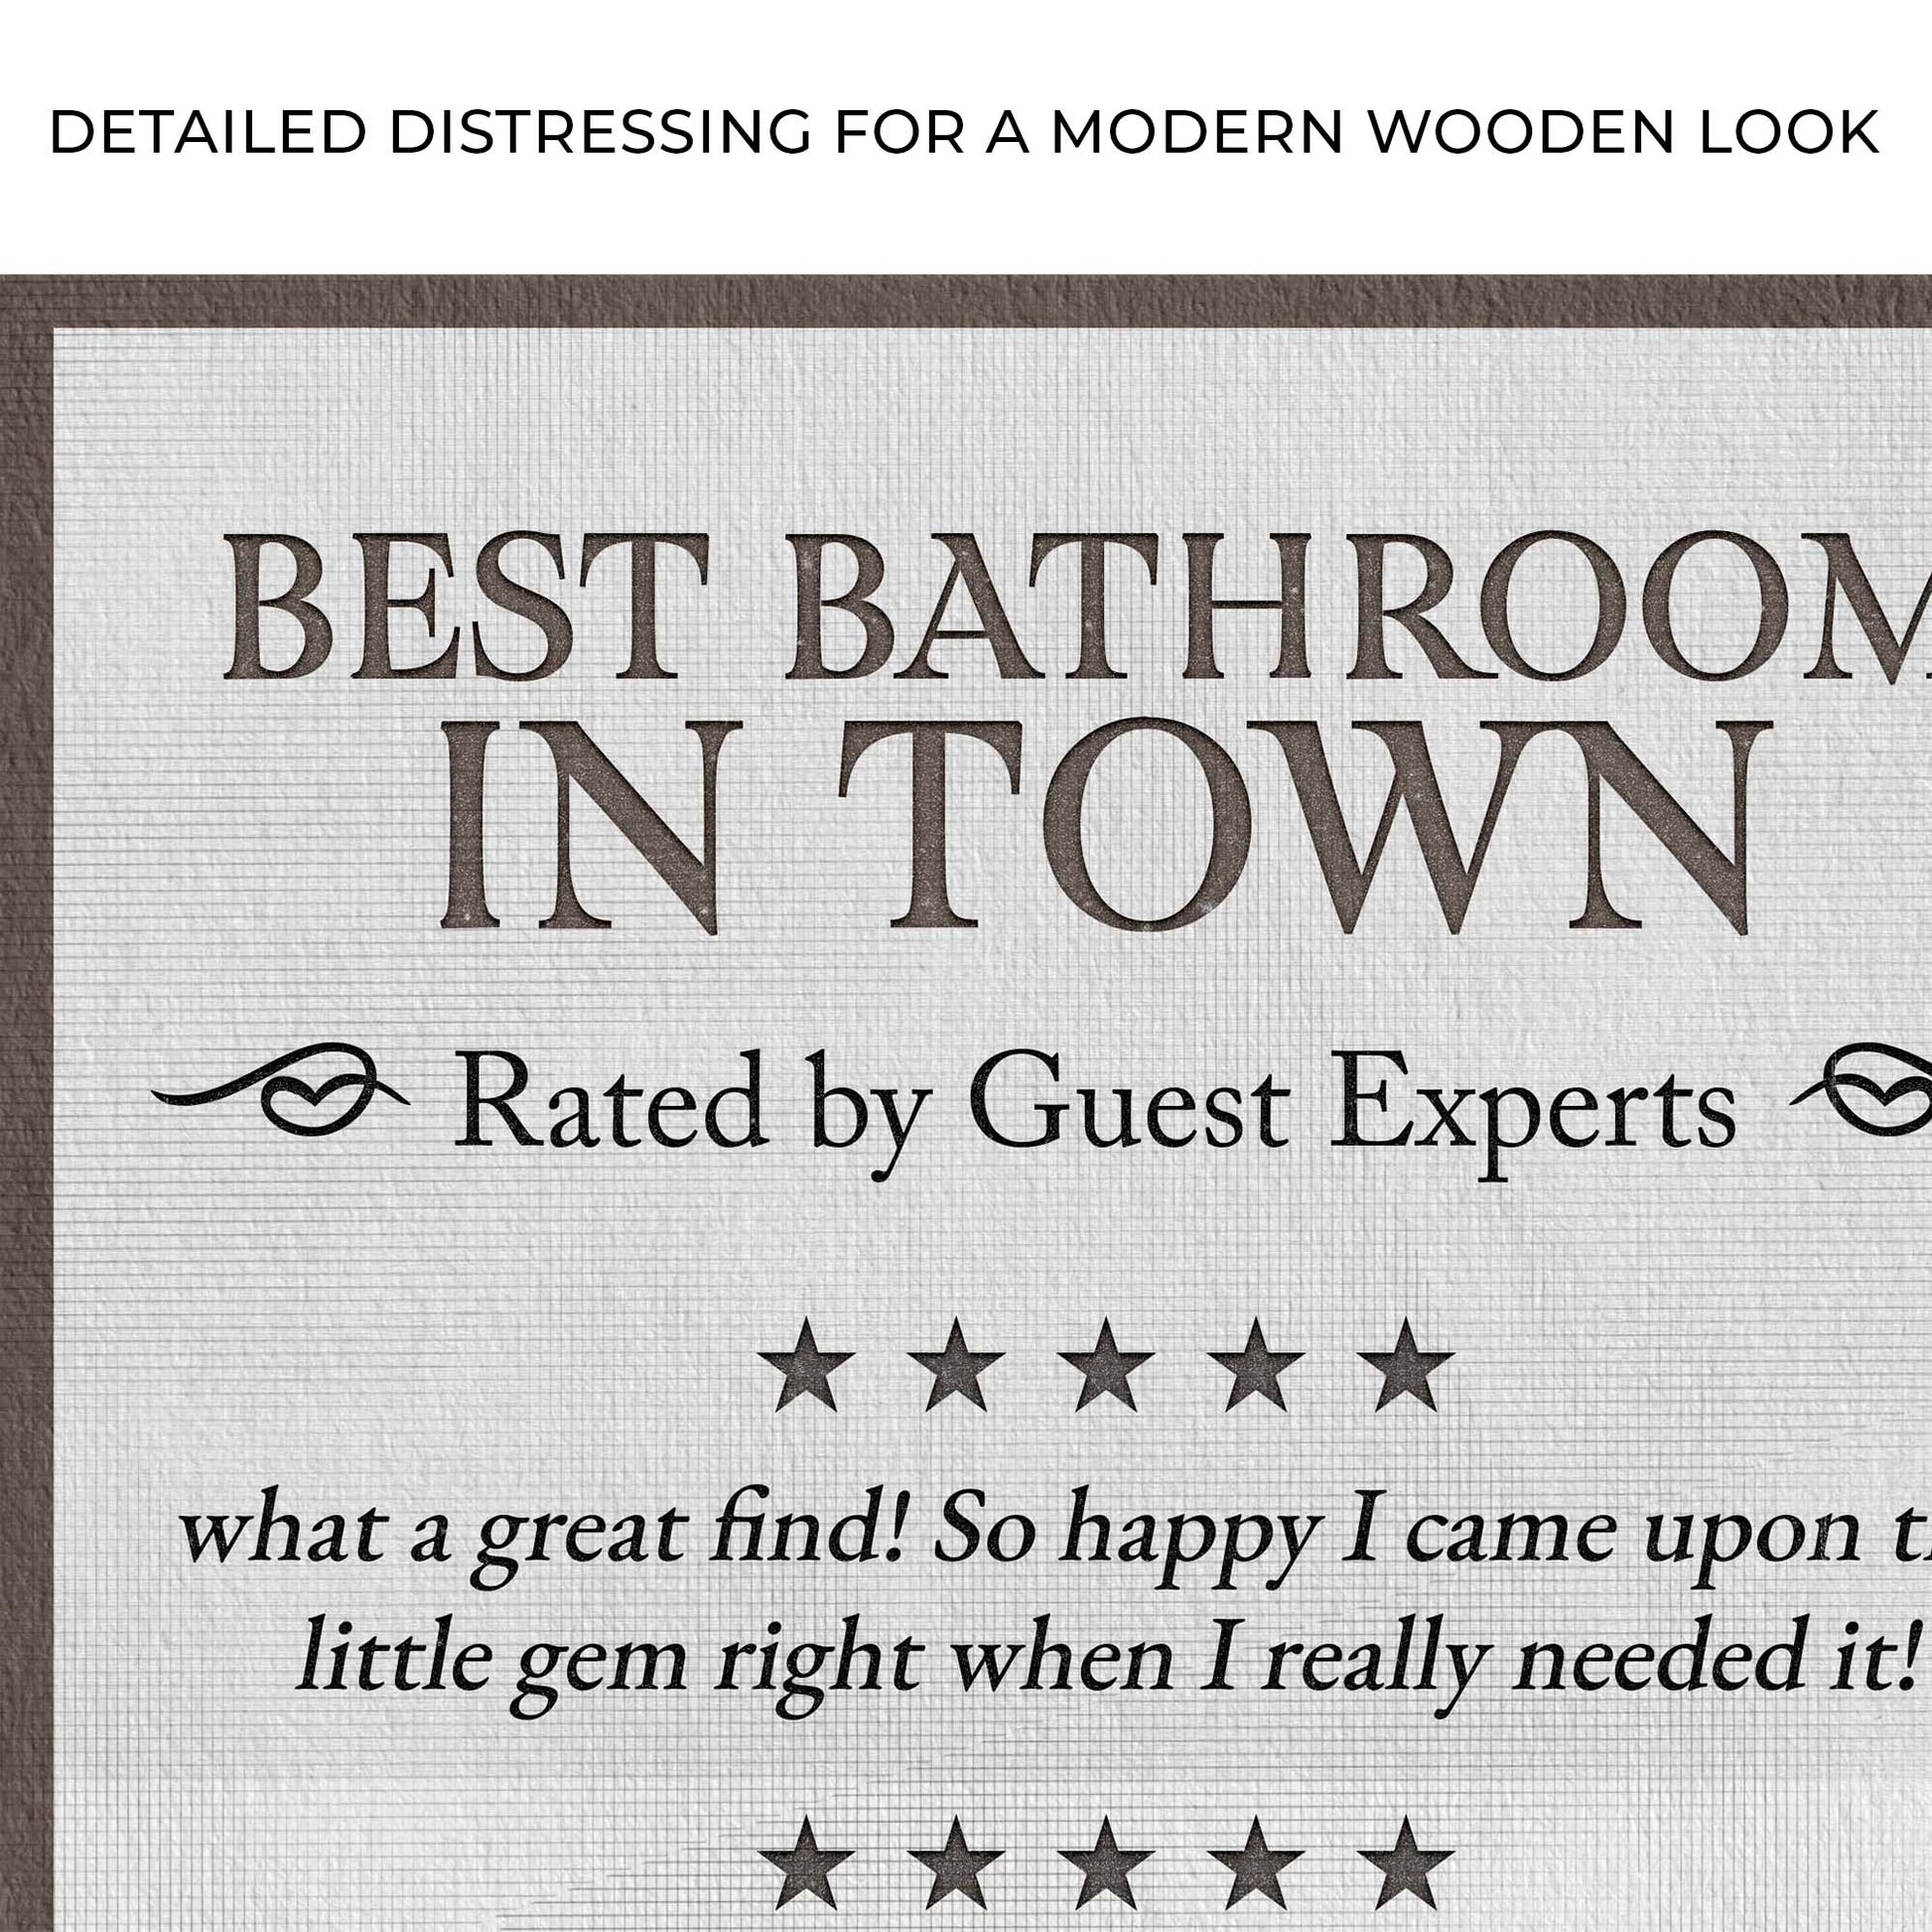 Restroom Guest Reviews Sign Zoom - Imaged by Tailored Canvases